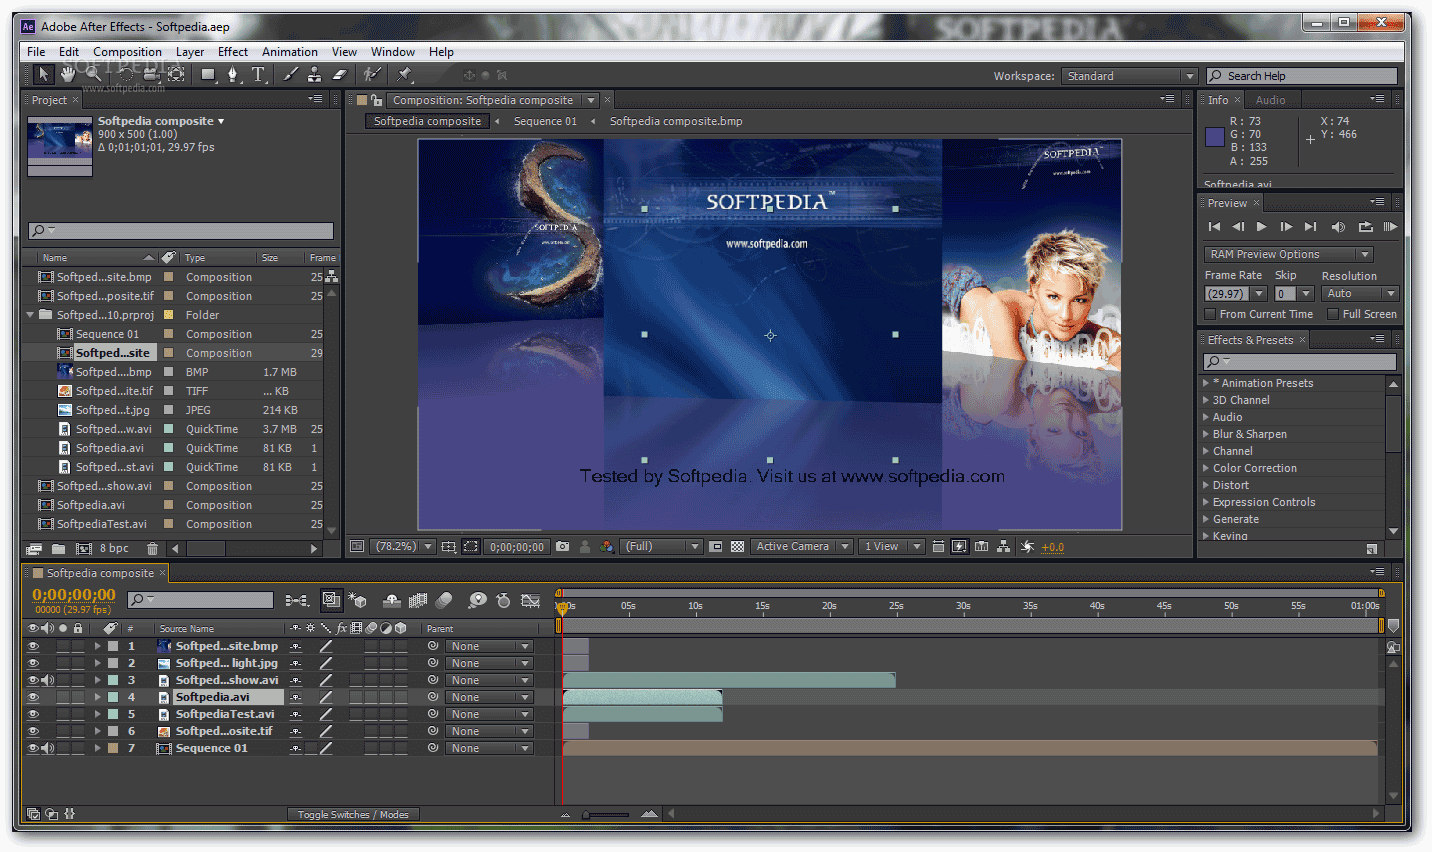 adobe after effects cs4 free download full version windows 7